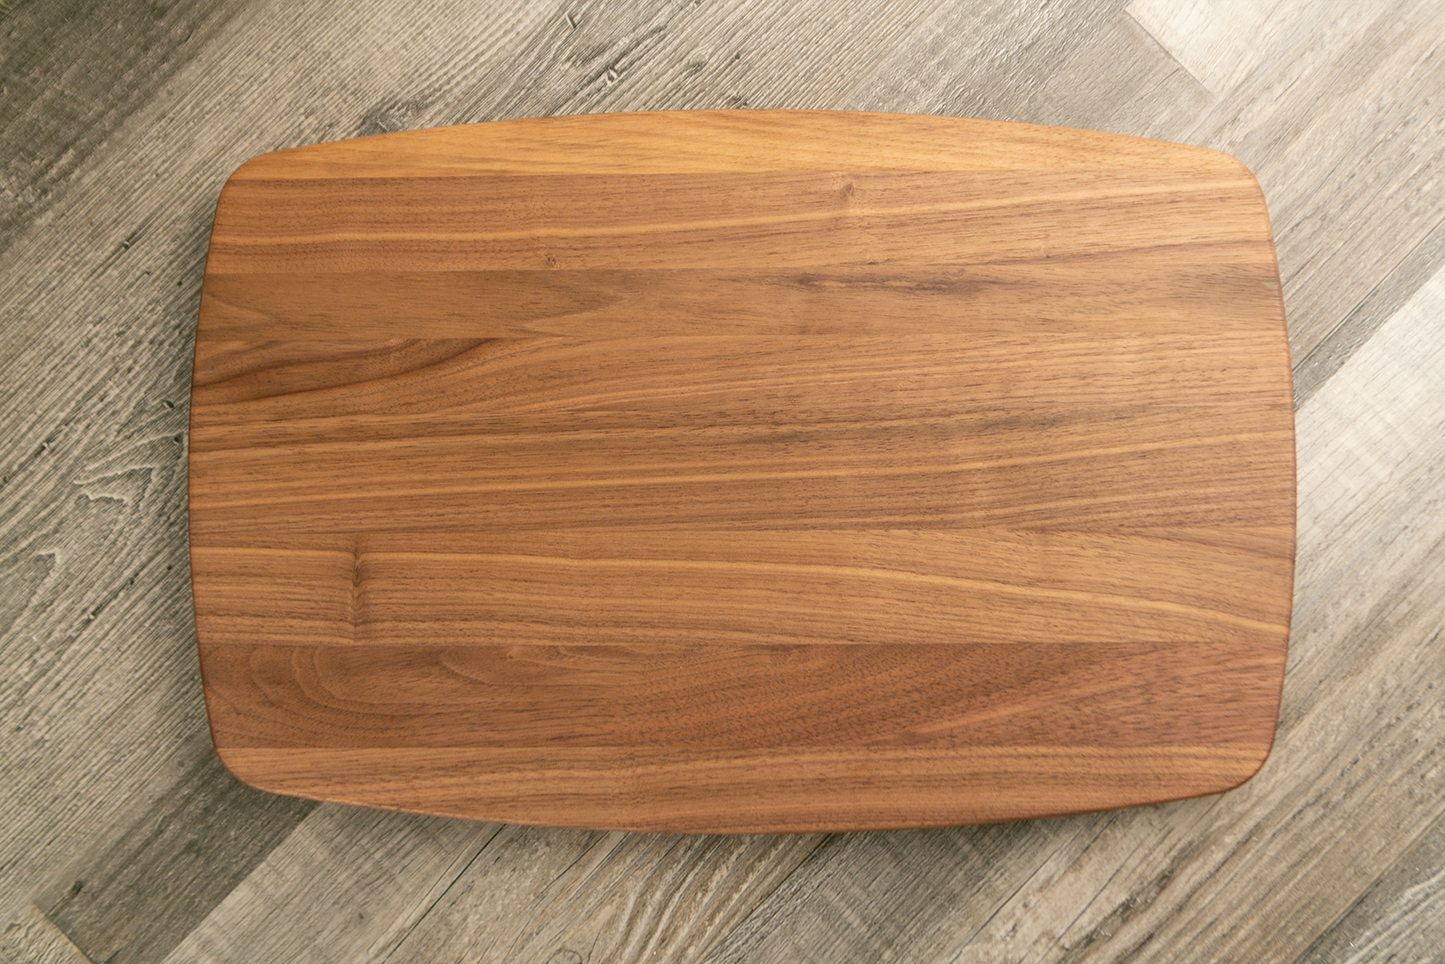 Walnut Charcuterie/Serving board - 10.5"x16" Arched